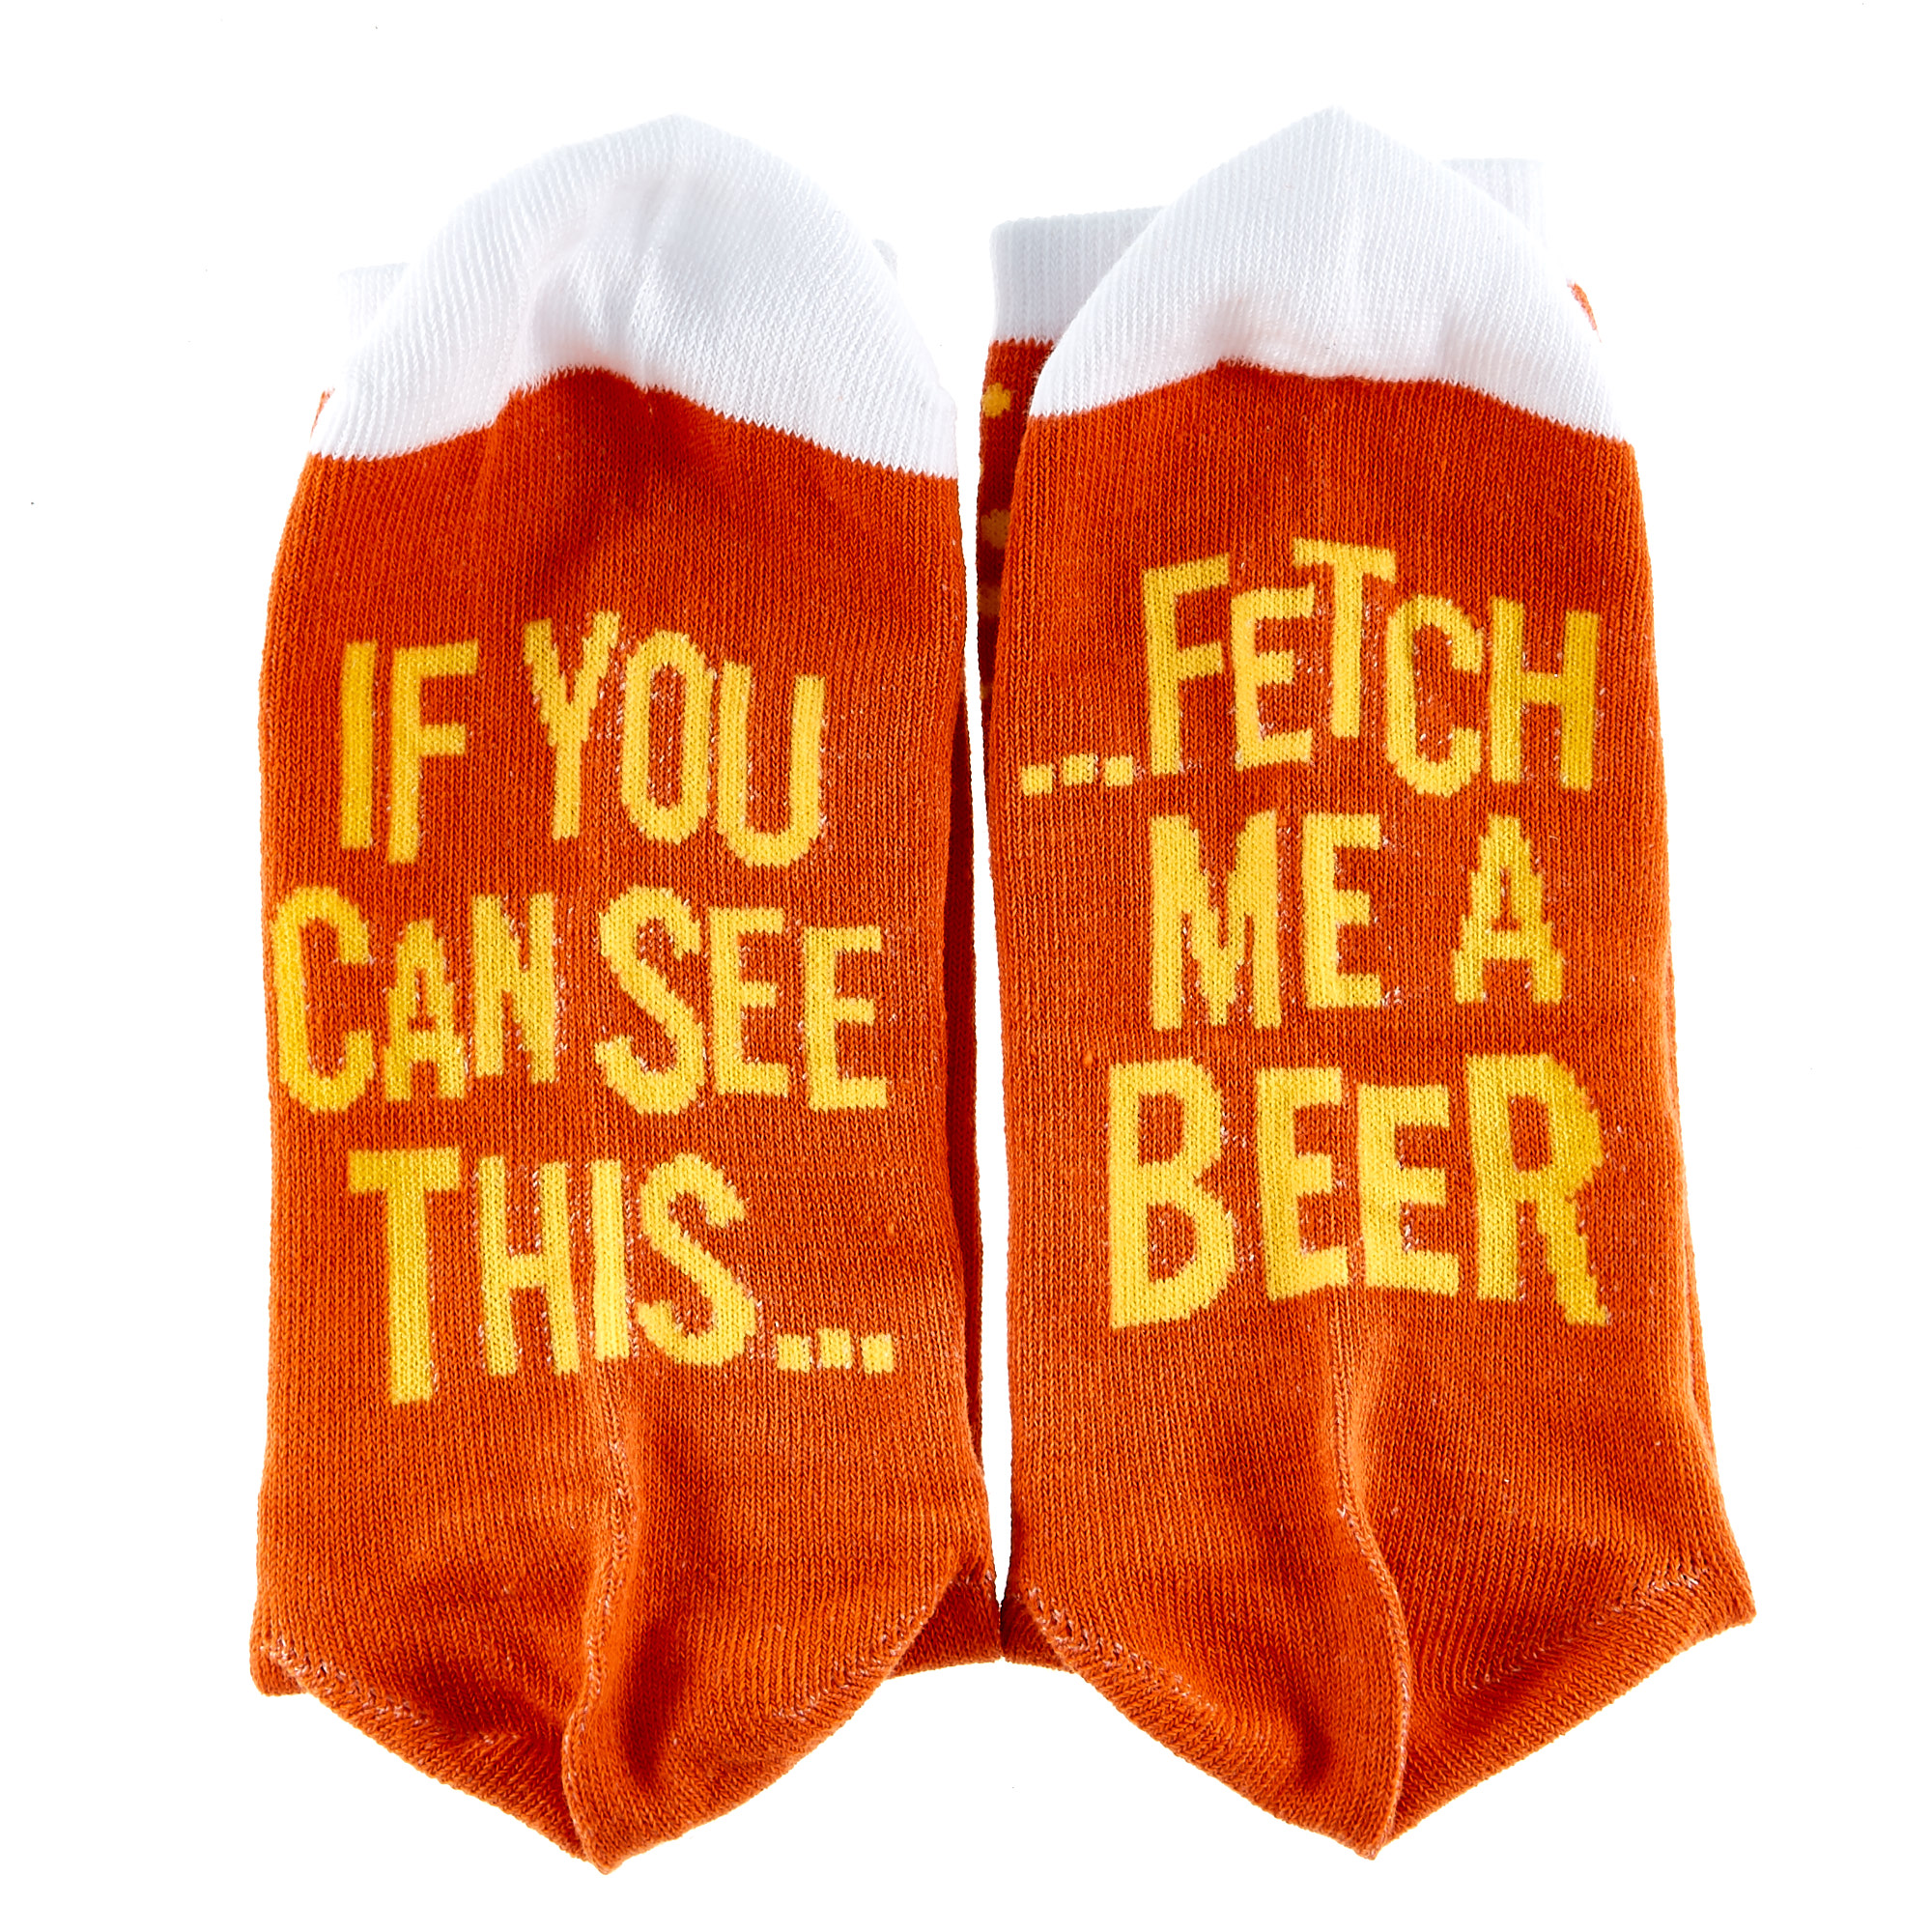 Novelty Dad Beer Socks In A Can 